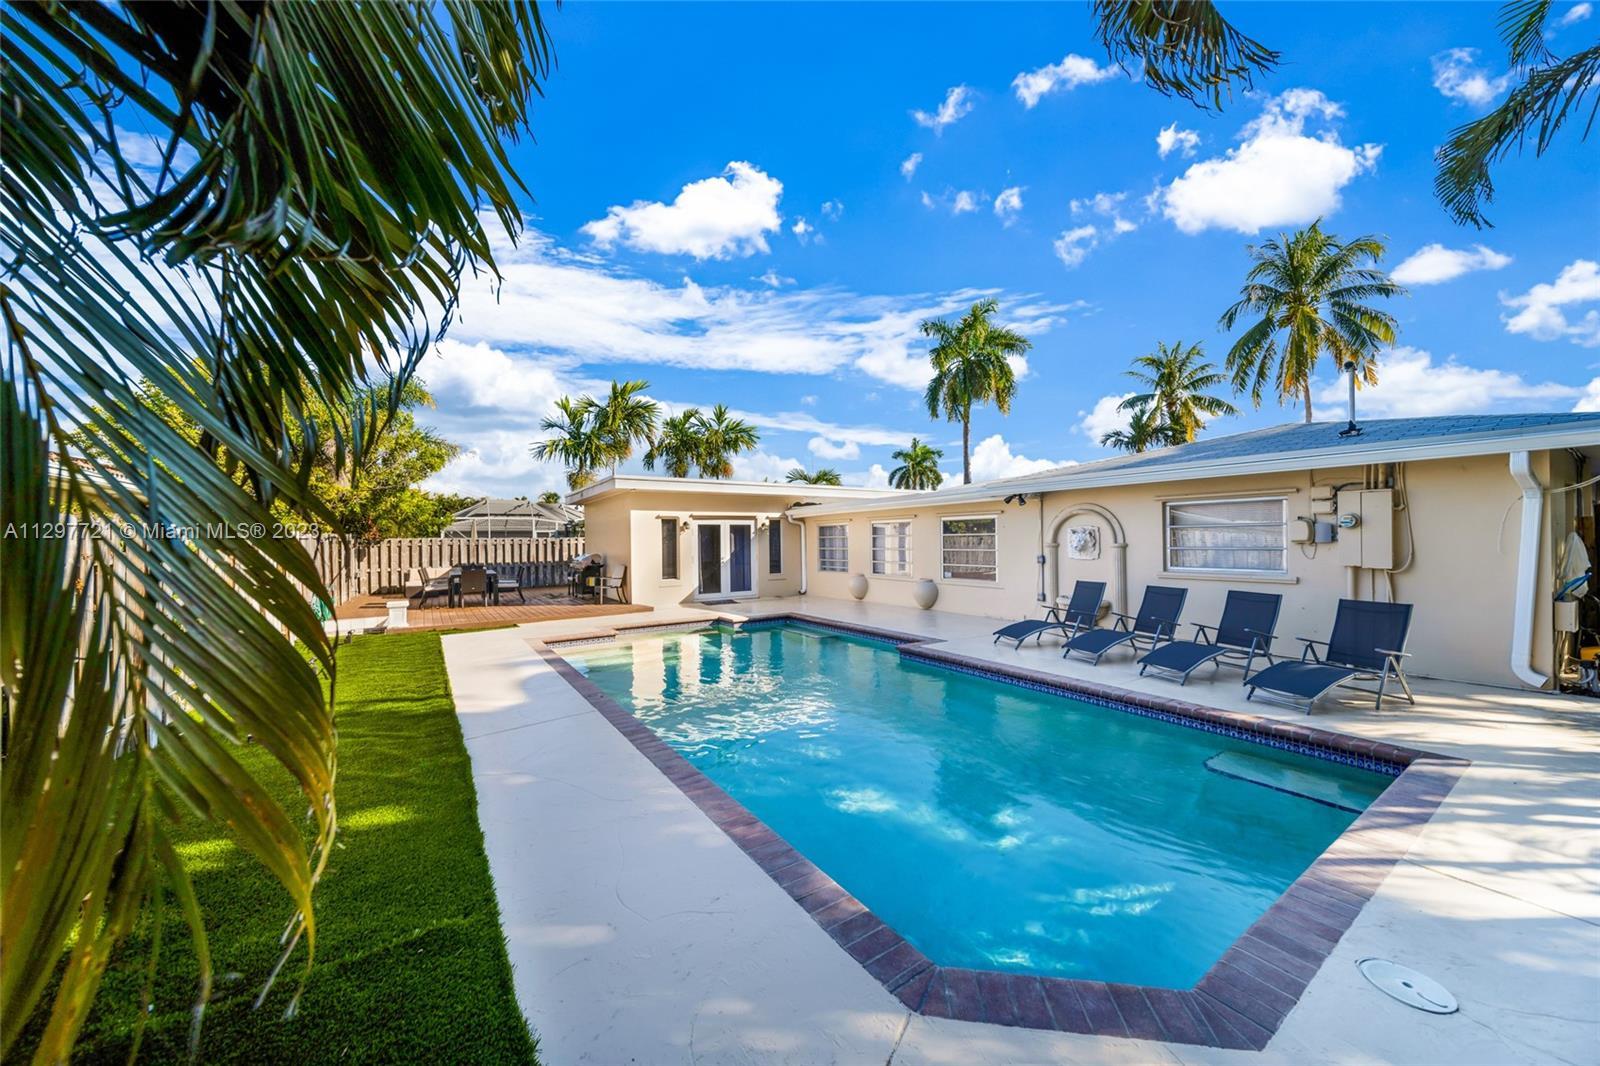 Photo of 241 Oceanic Ave in Lauderdale By The Sea, FL